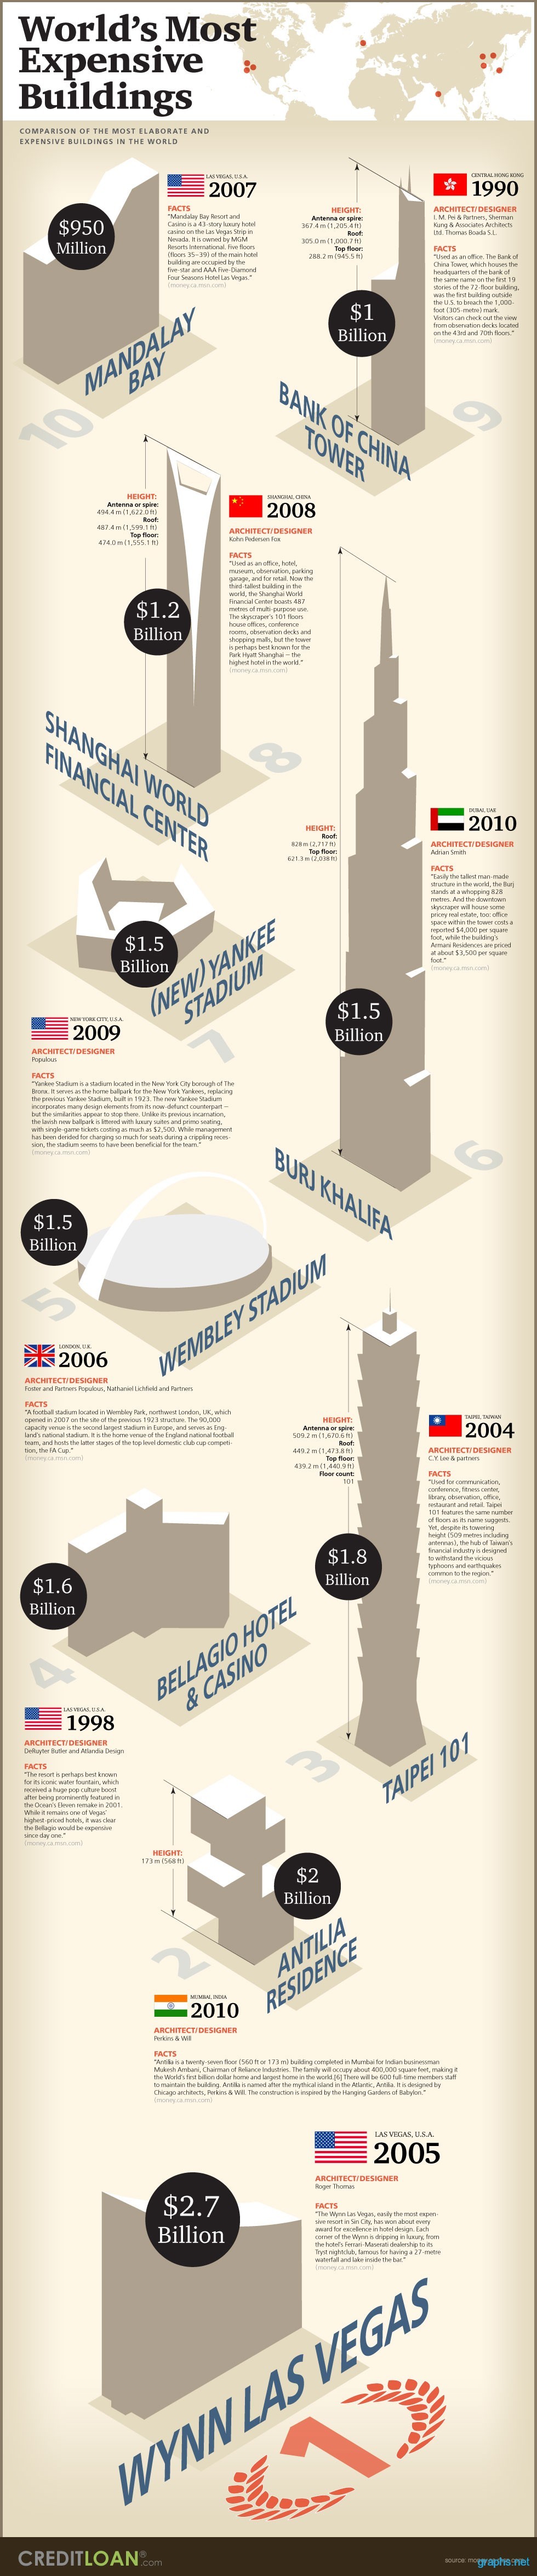 Most Expensive Buildings in the World